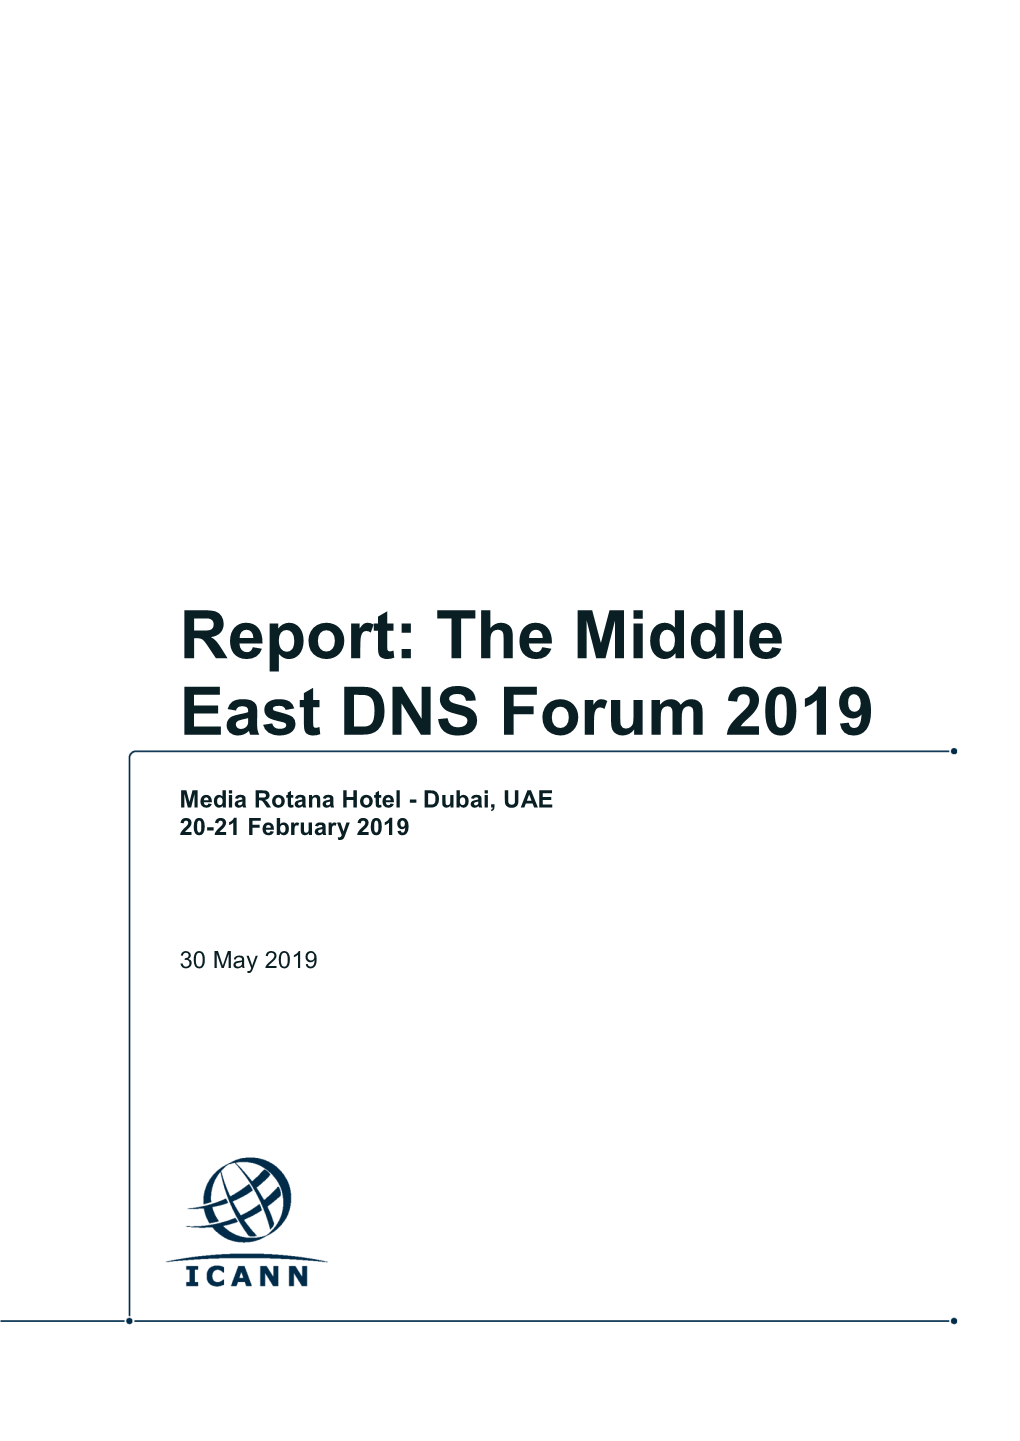 Report: the Middle East DNS Forum 2019